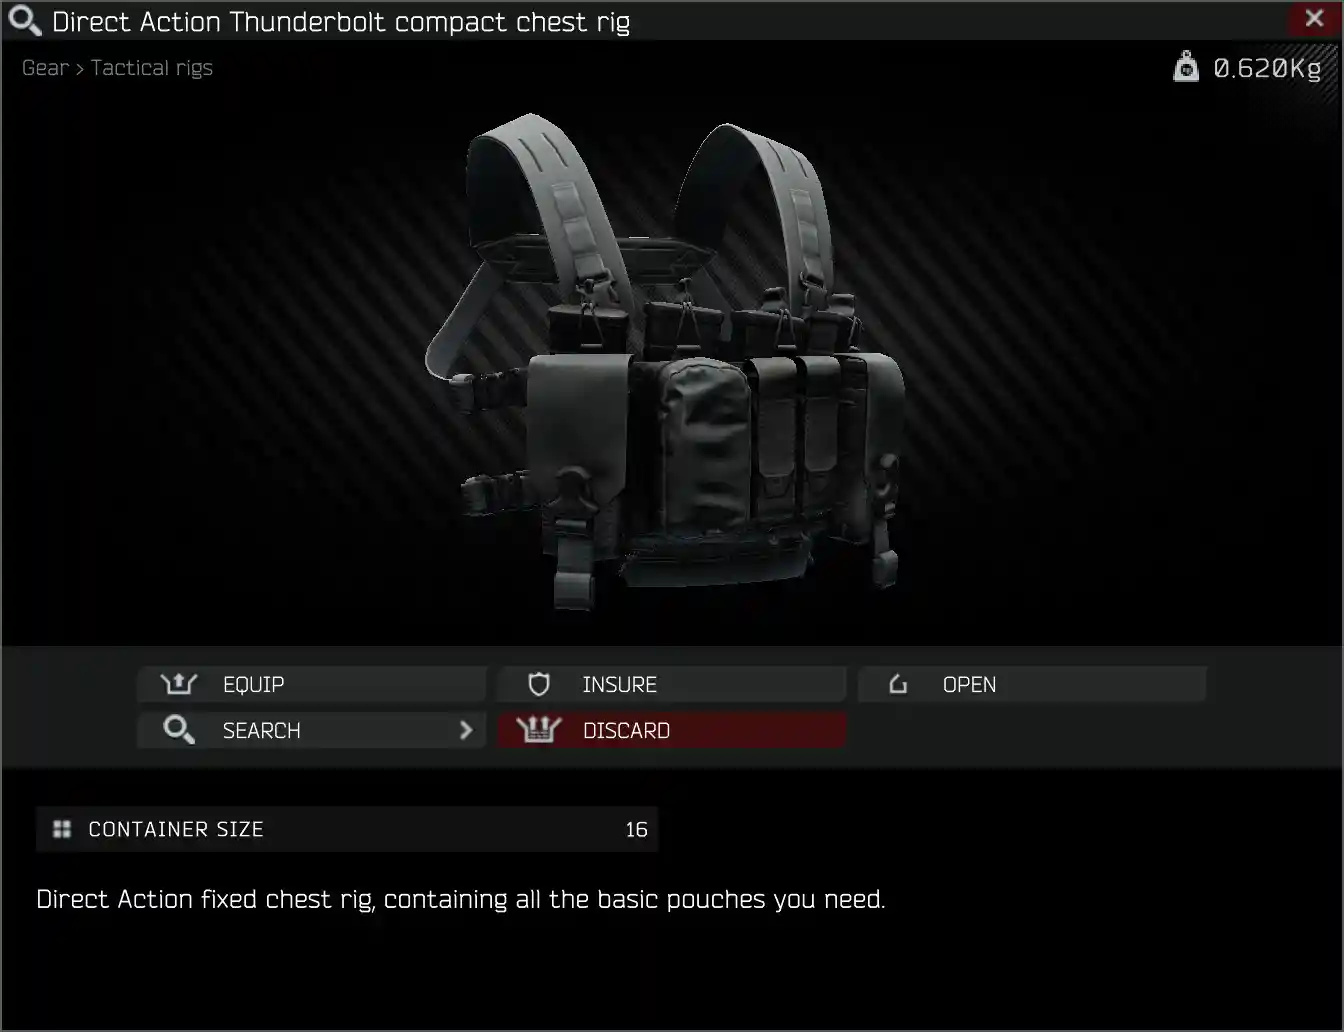 Direct Action Thunderbolt compact chest rig.jpg